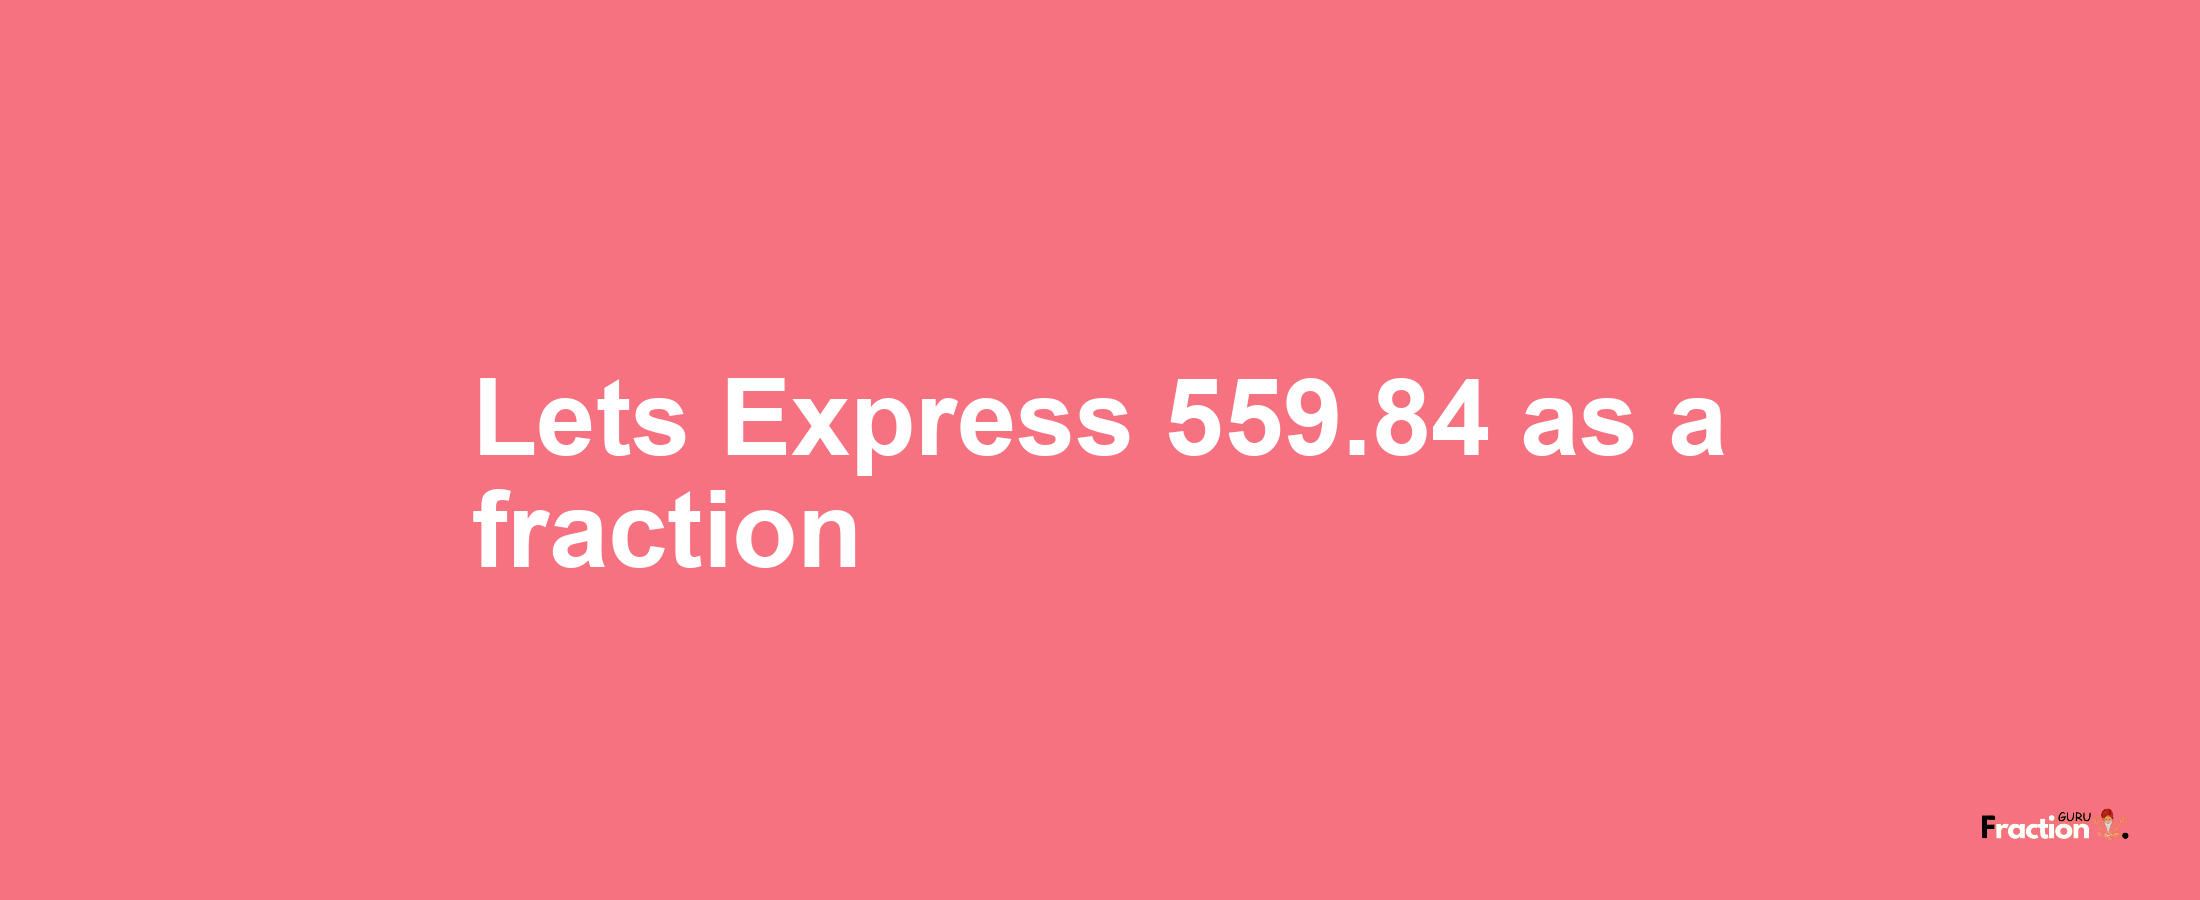 Lets Express 559.84 as afraction